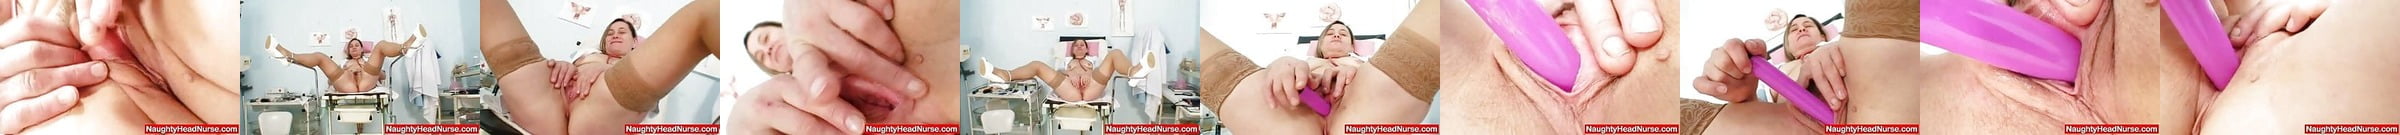 Speculum In A Tight Madam Medic Pussy Porn 2f Xhamster Nl